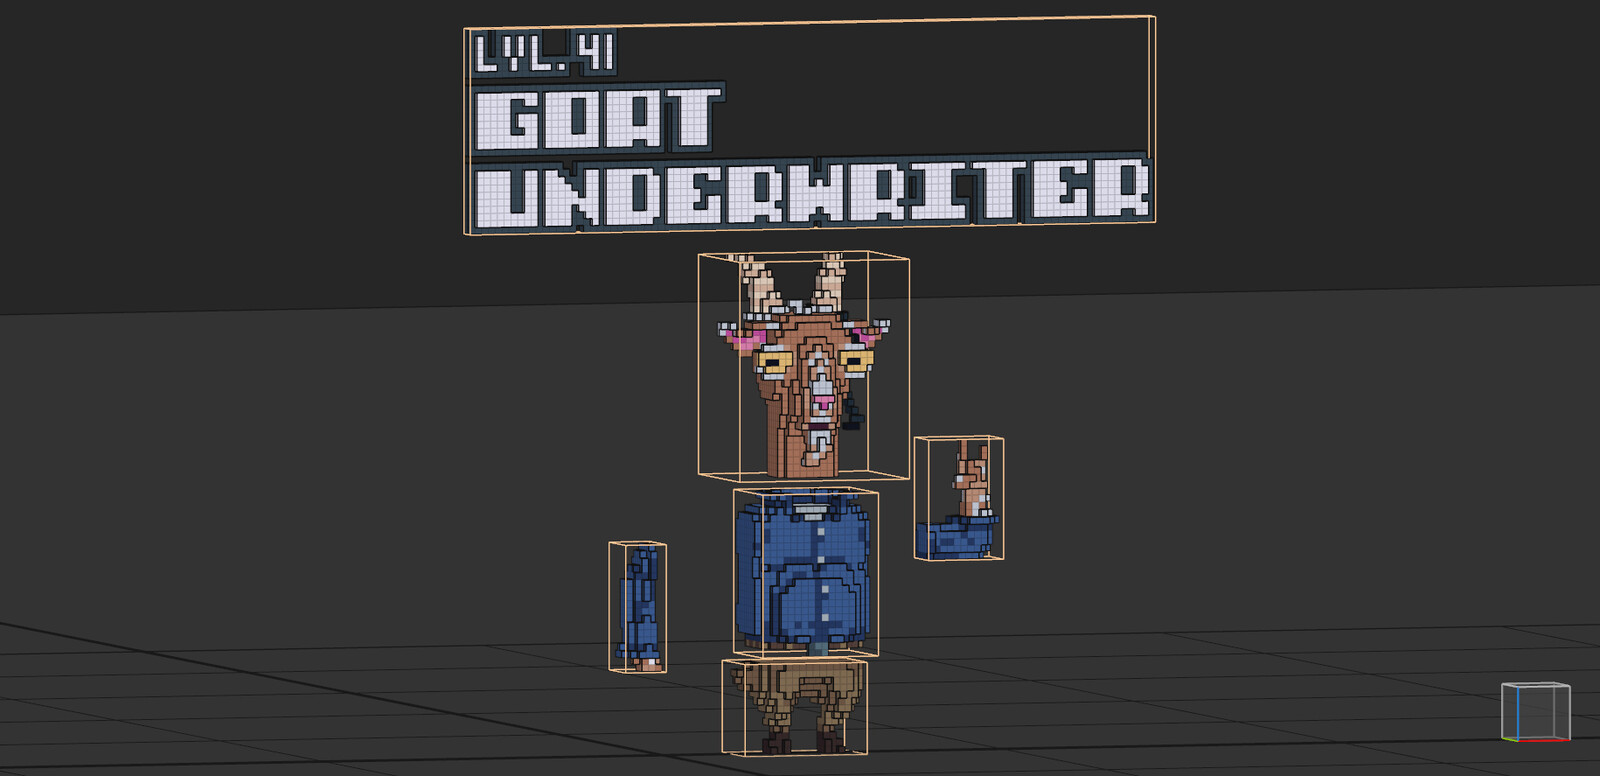 Workspace view of voxel Goat Underwriter character and logo within the Magicavoxel software interface.